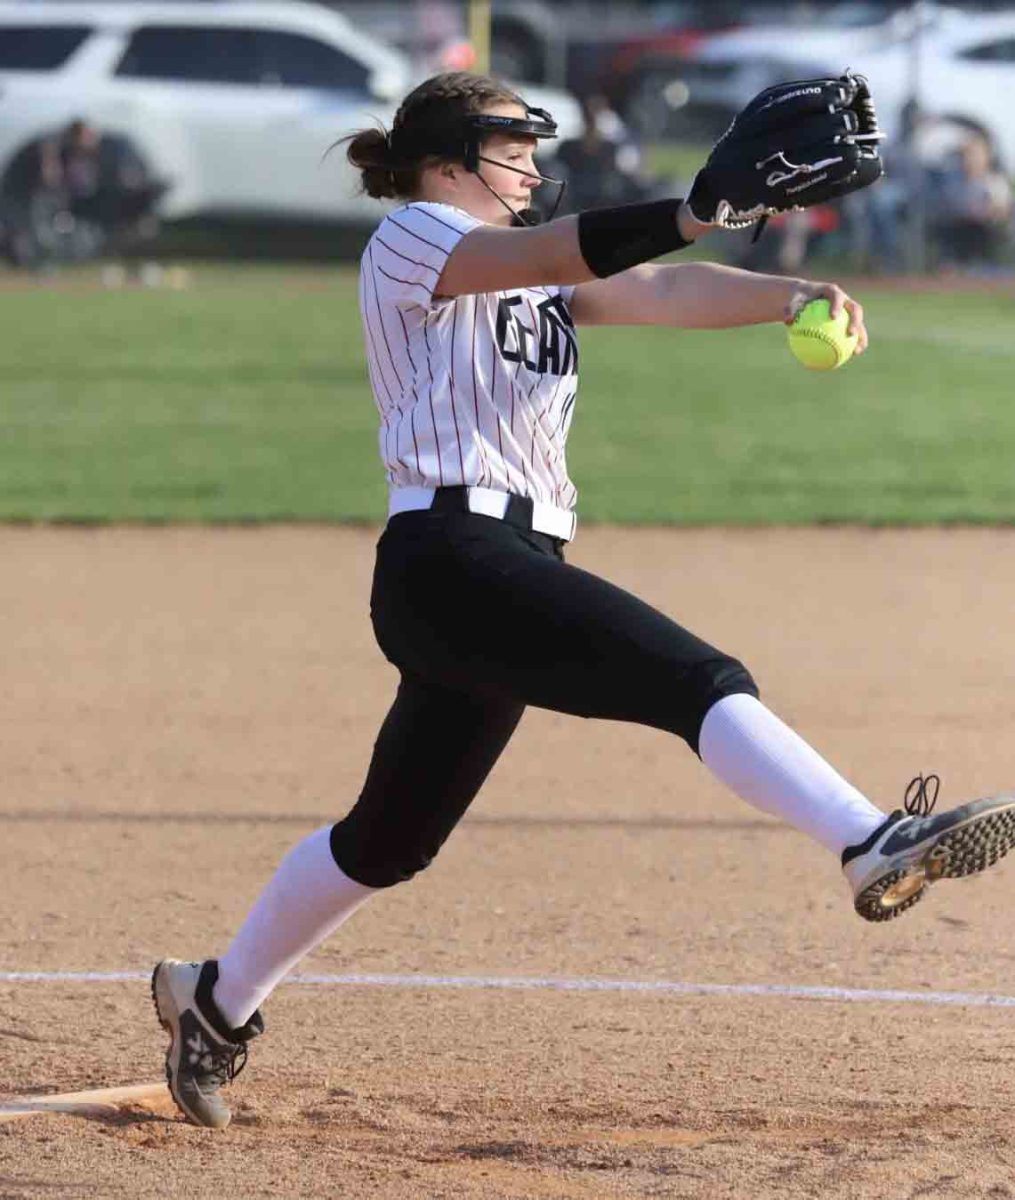 Harlan+County+freshman+Alexis+Adams+pitched+a+one-hitter+with+six+strikeouts+in+the+Lady+Bears+15-0+win+Thursday+over+visiting+Harlan.